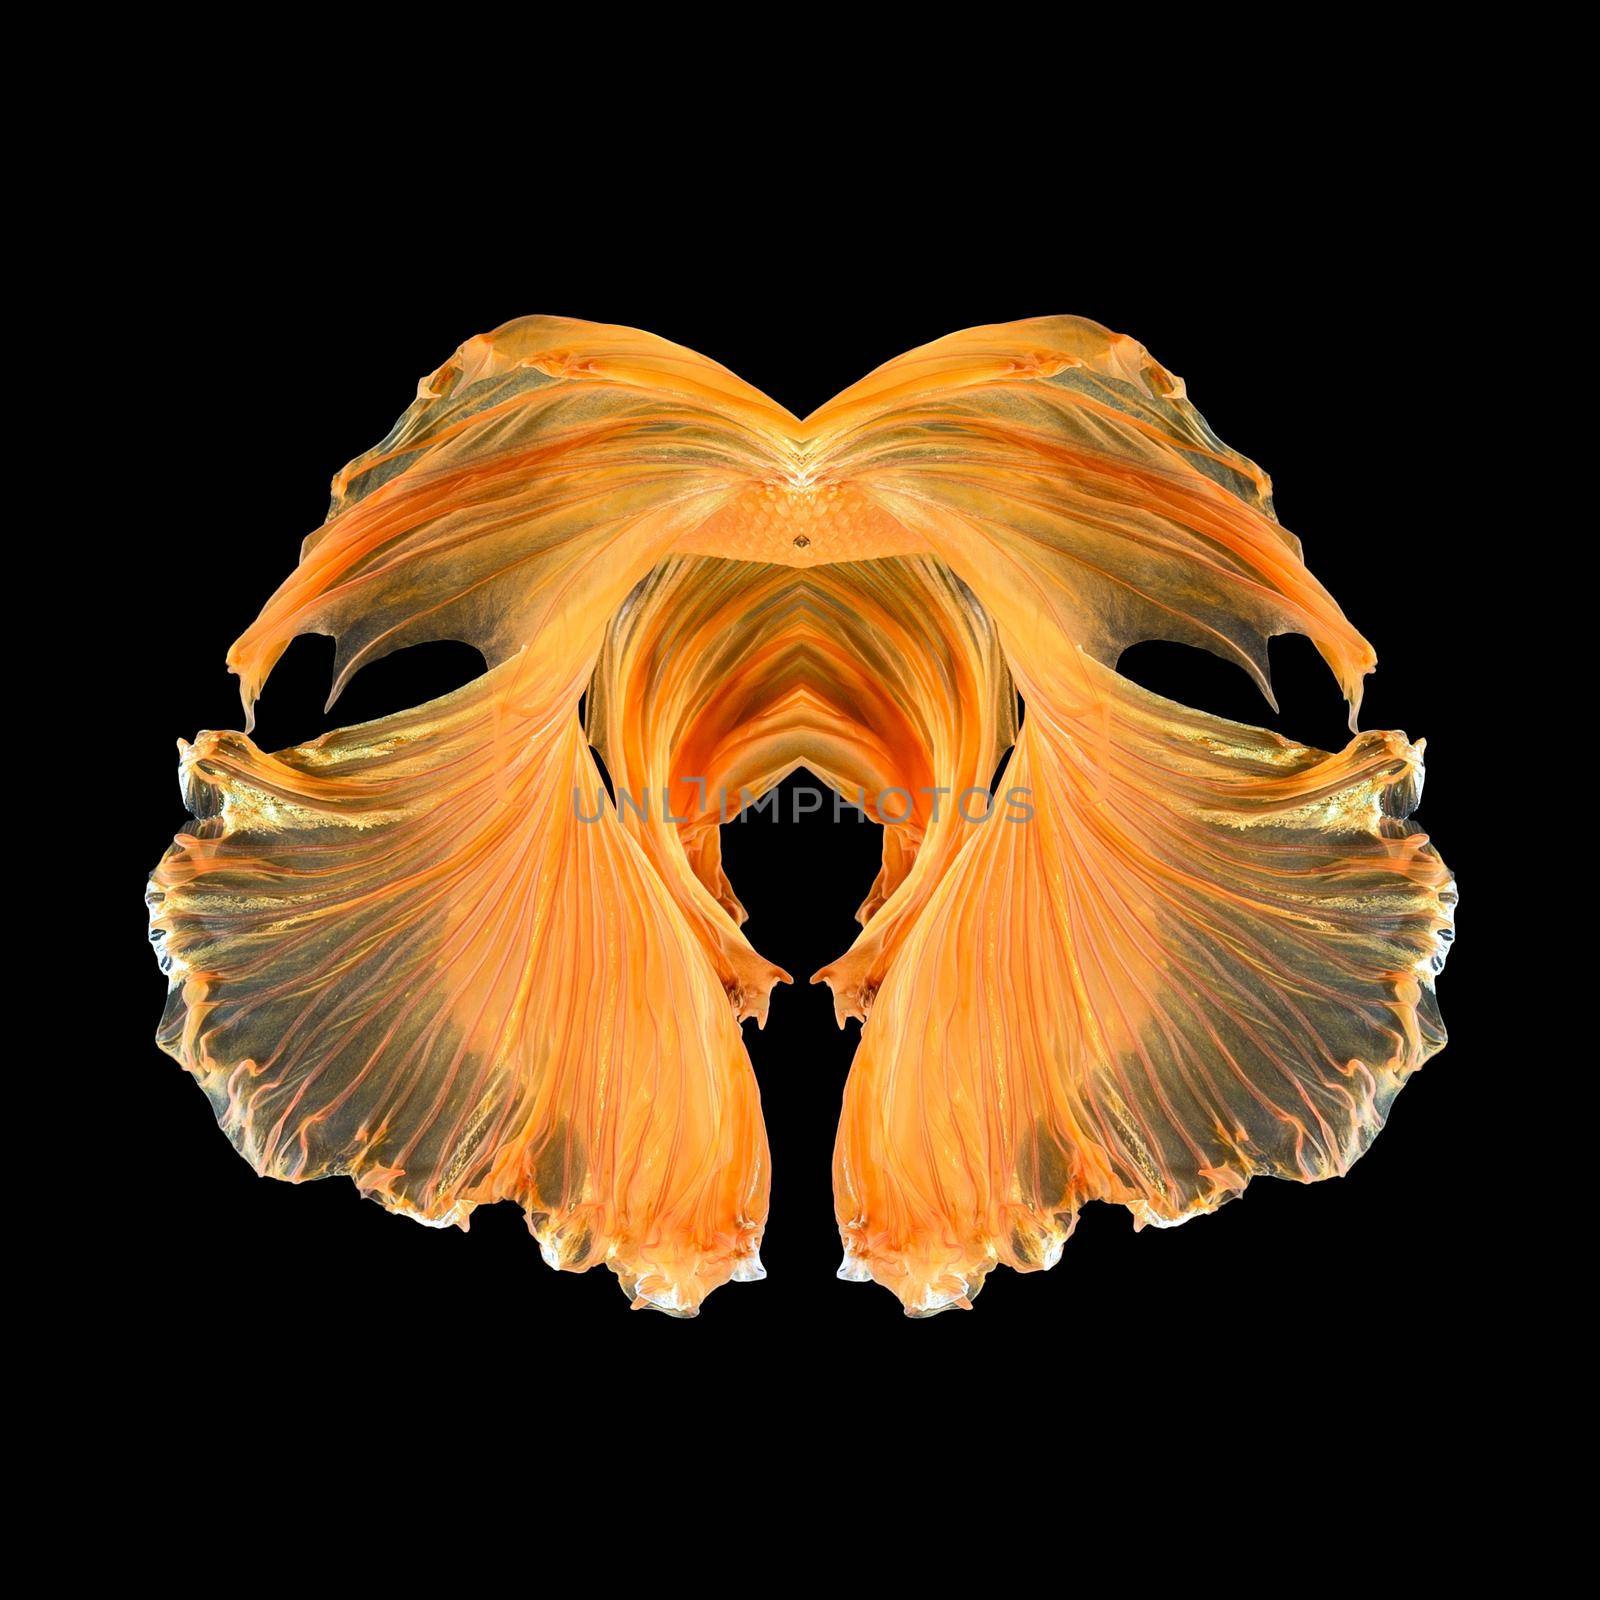 Abstract fine art fish tail free form of Betta fish or Siamese fighting fish isolated on black background.